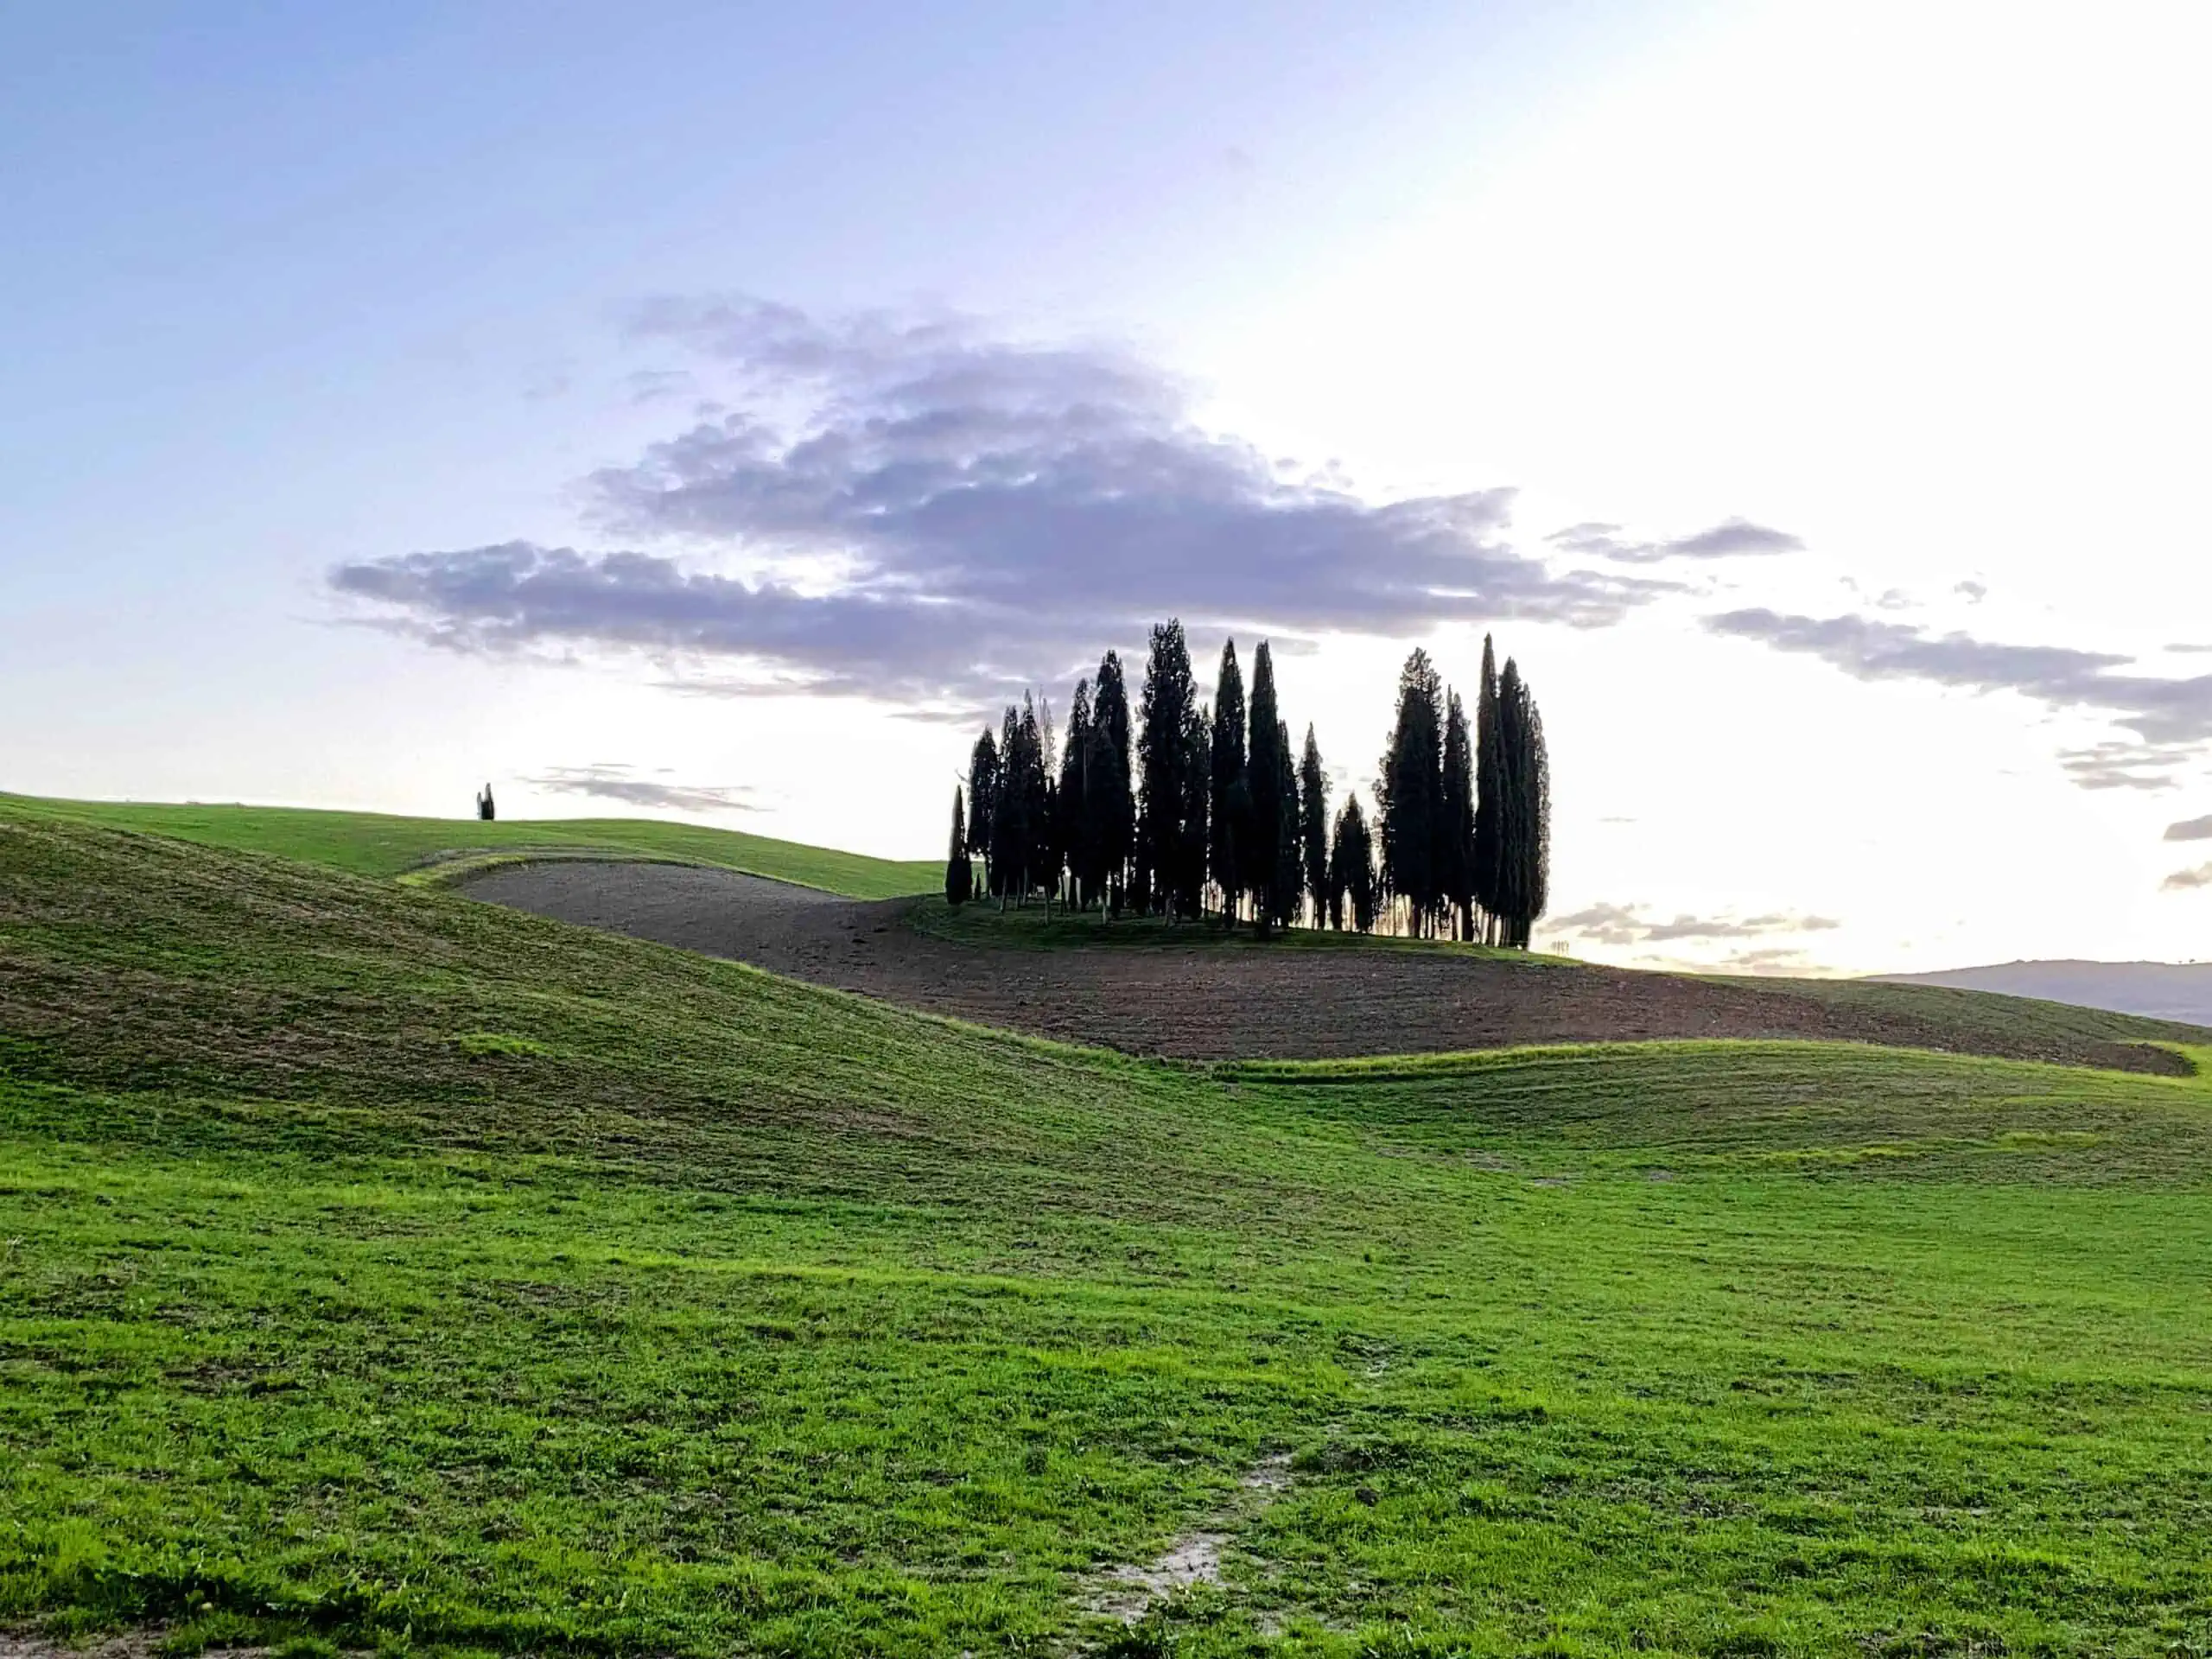 Group of cypress trees in an empty field. It's nearing sunset time. Grass is bright green and there is a ring of dirt around the base of the trees.